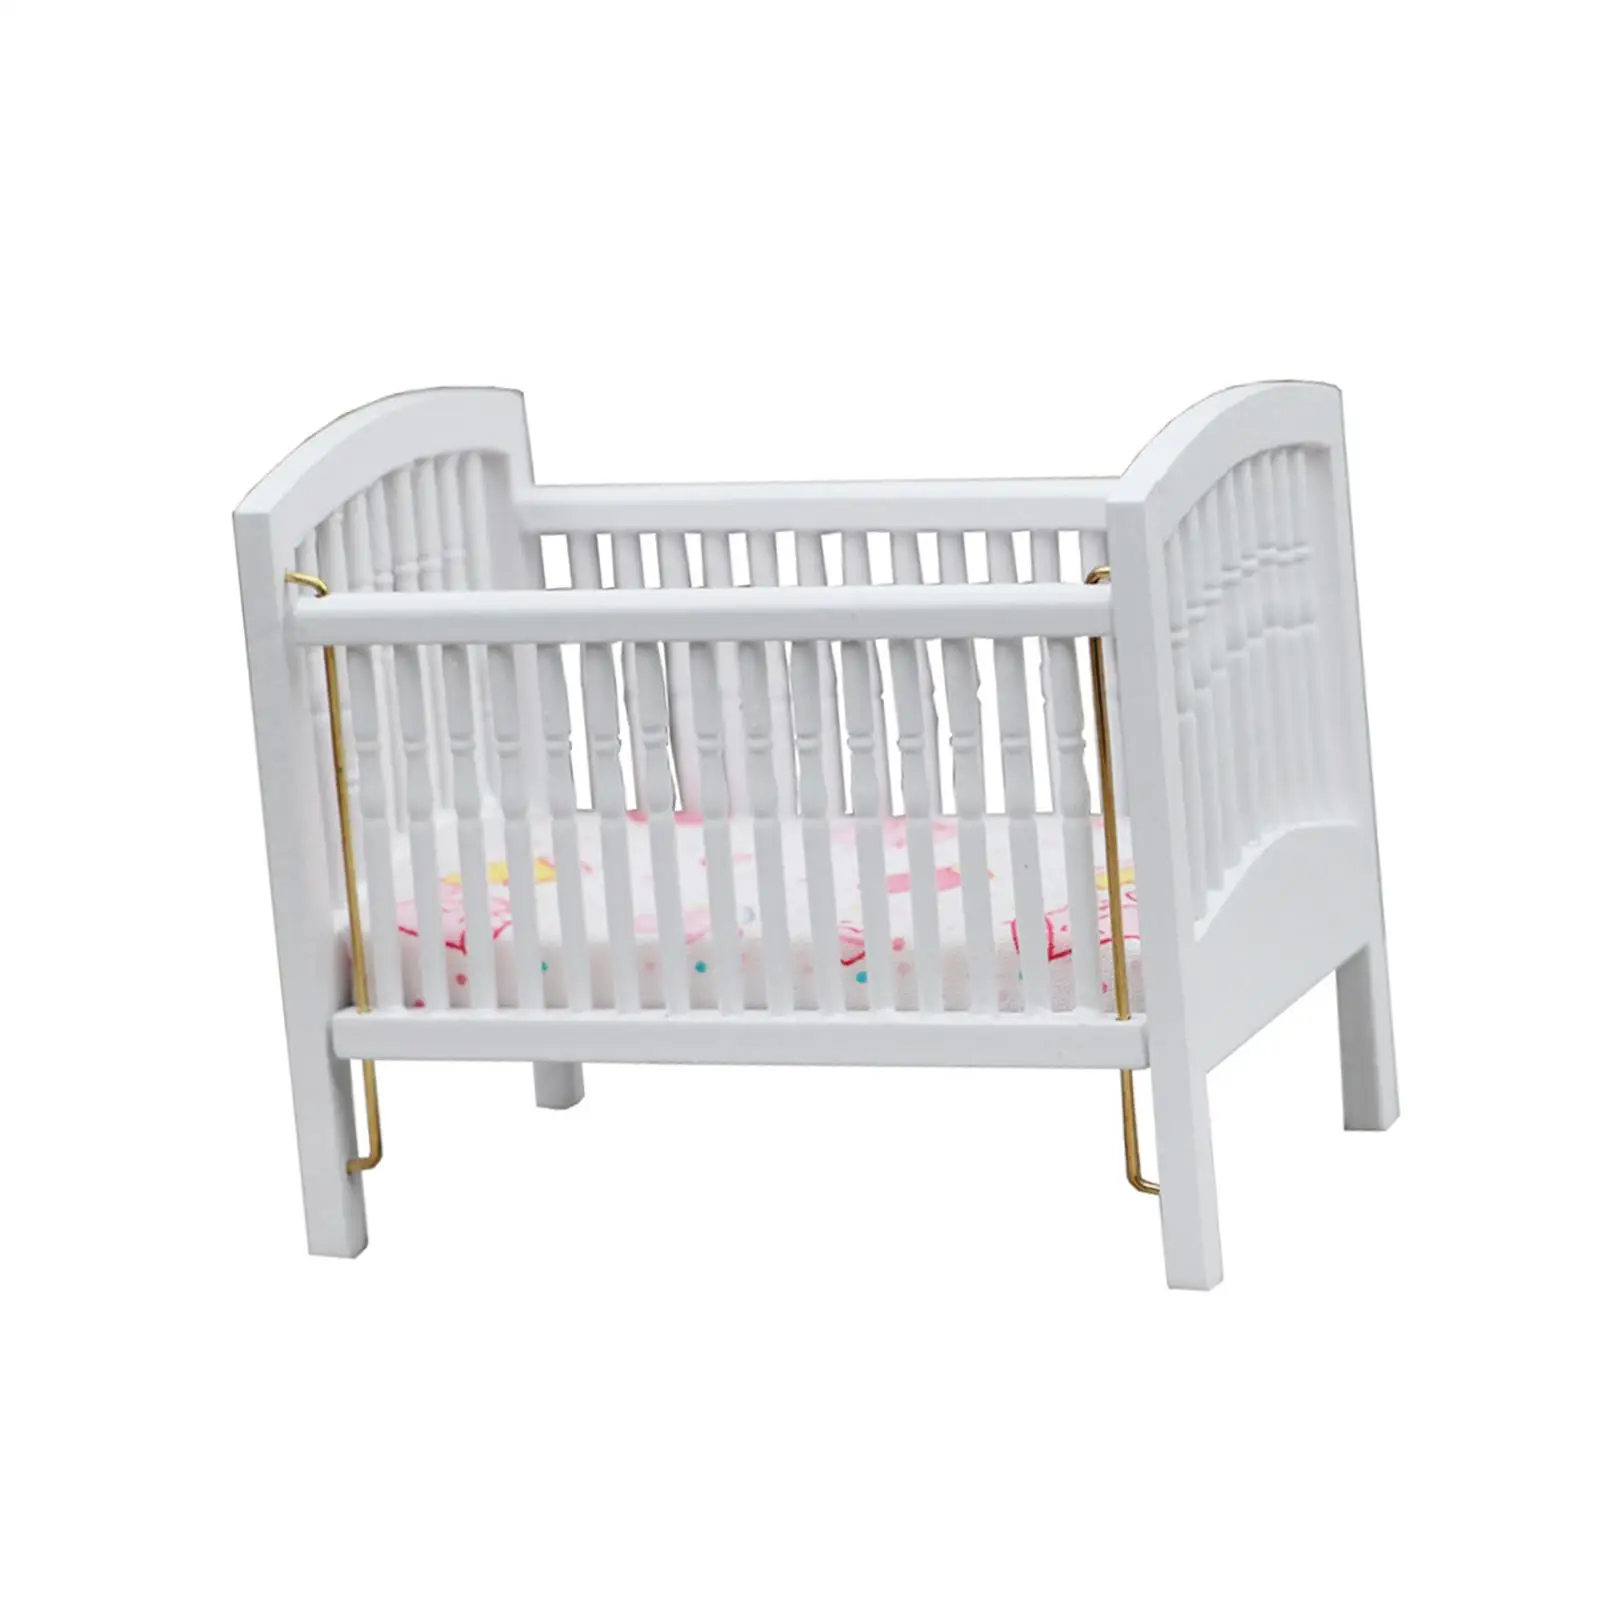 Simulation 1/12 Scale Miniature Crib with Mattress Bedroom Accessories Toy